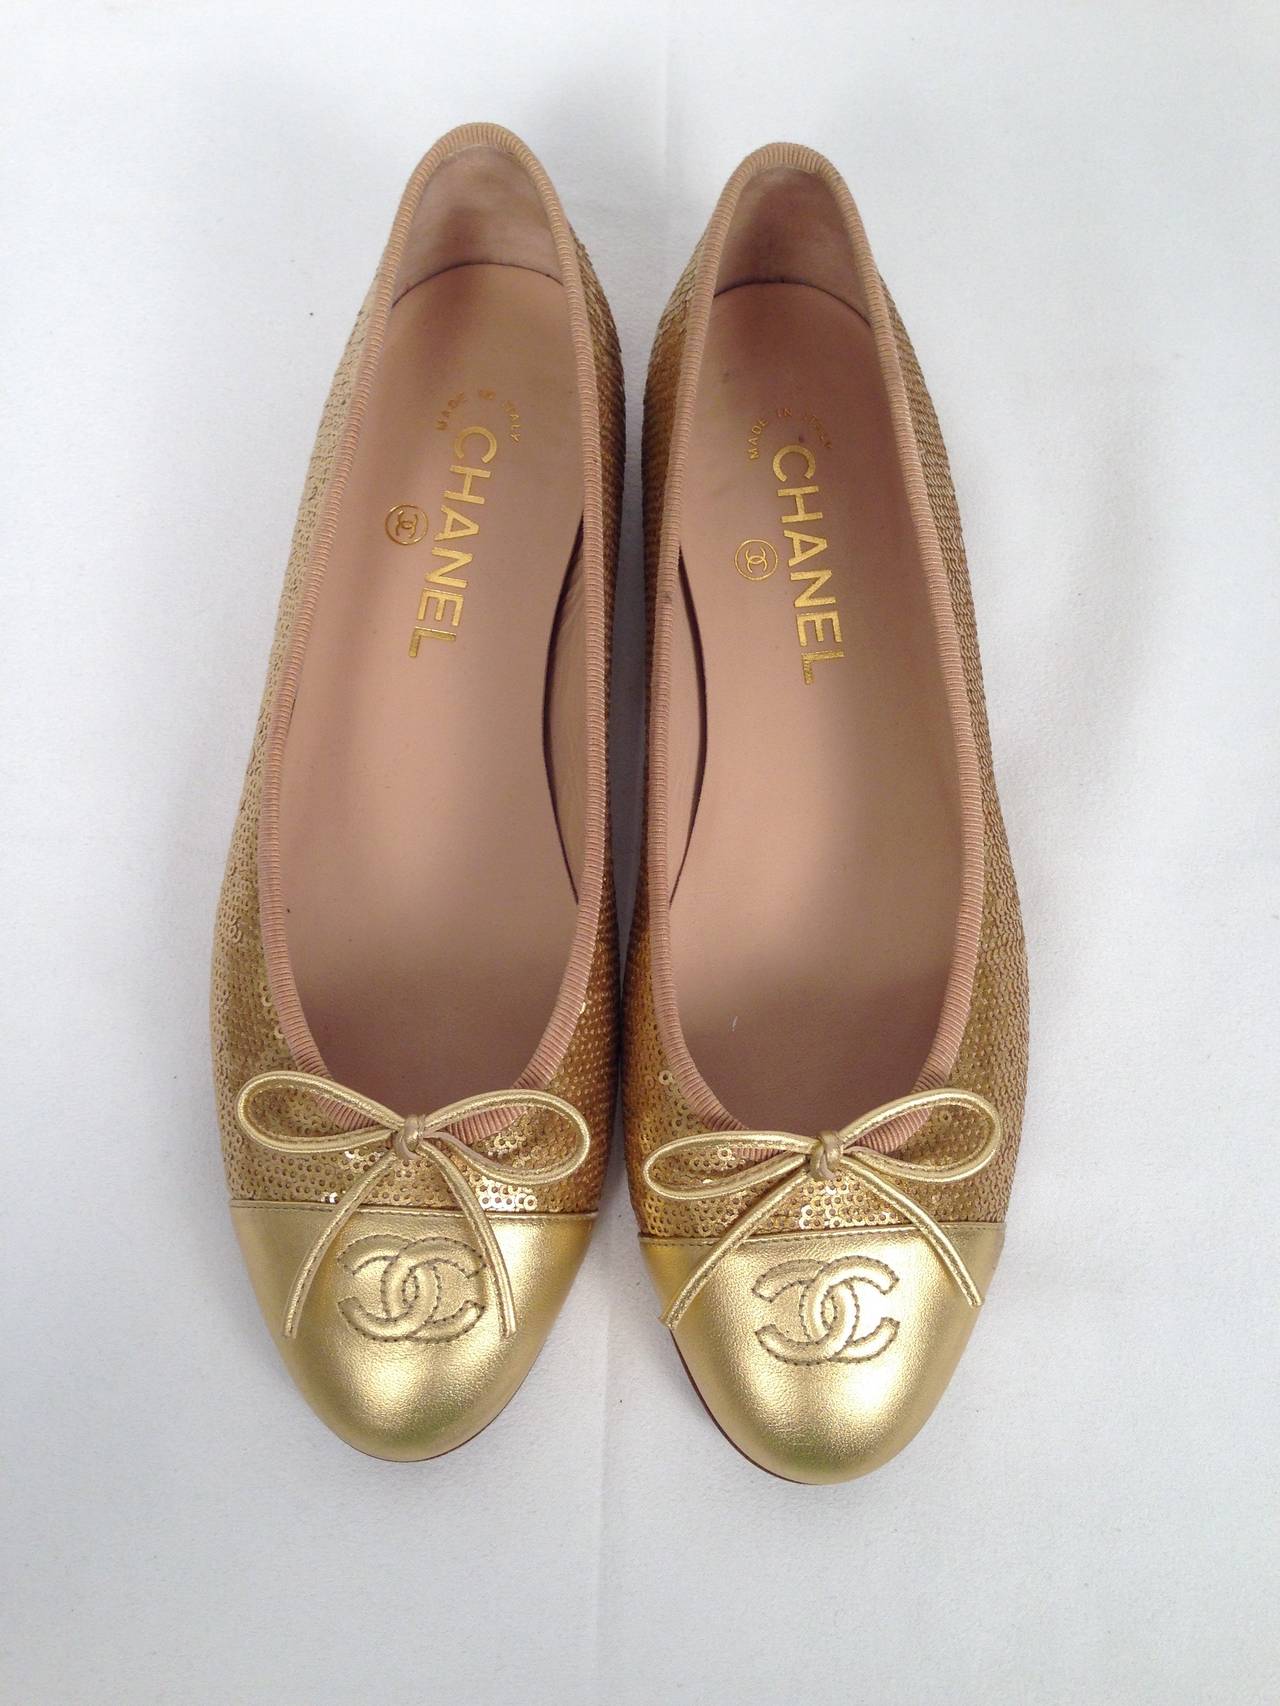 Shine on in these classic Chanel Leather and Gold Sequin Ballerina Flats With Metallic Gold Cap Toe.  Features include CC logo stitched cap, metallic leather bow at the vamps, grosgrain ribbon trim, wooden heels and leather lined insoles.  Excellent